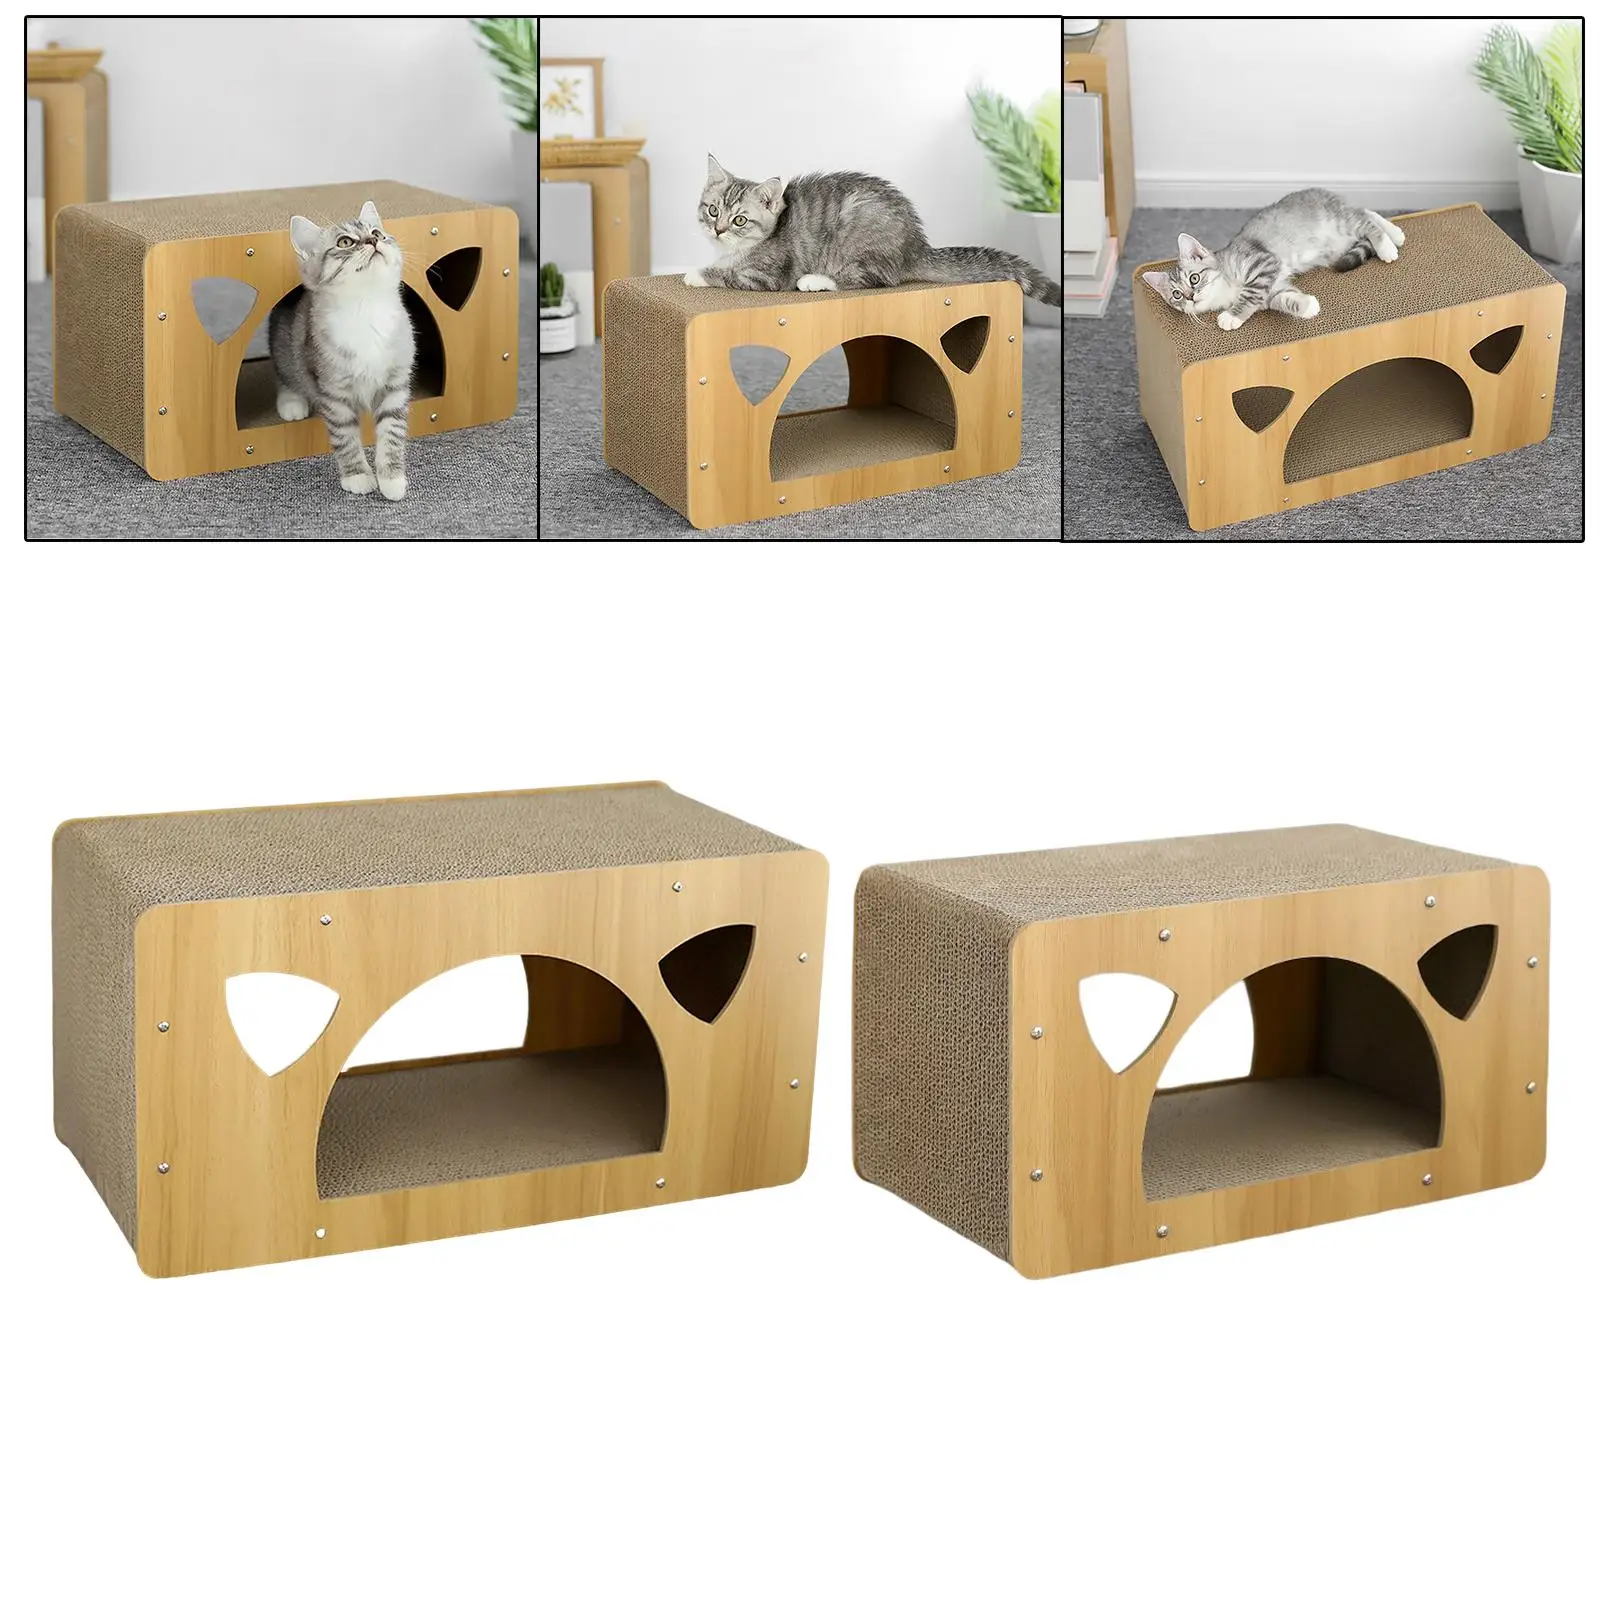 Cat Scratcher Cardboard Scratching Bed Condo Tent Claws Care Scratch Protective Lounge Corrugated House for Indoor Cats Kitty